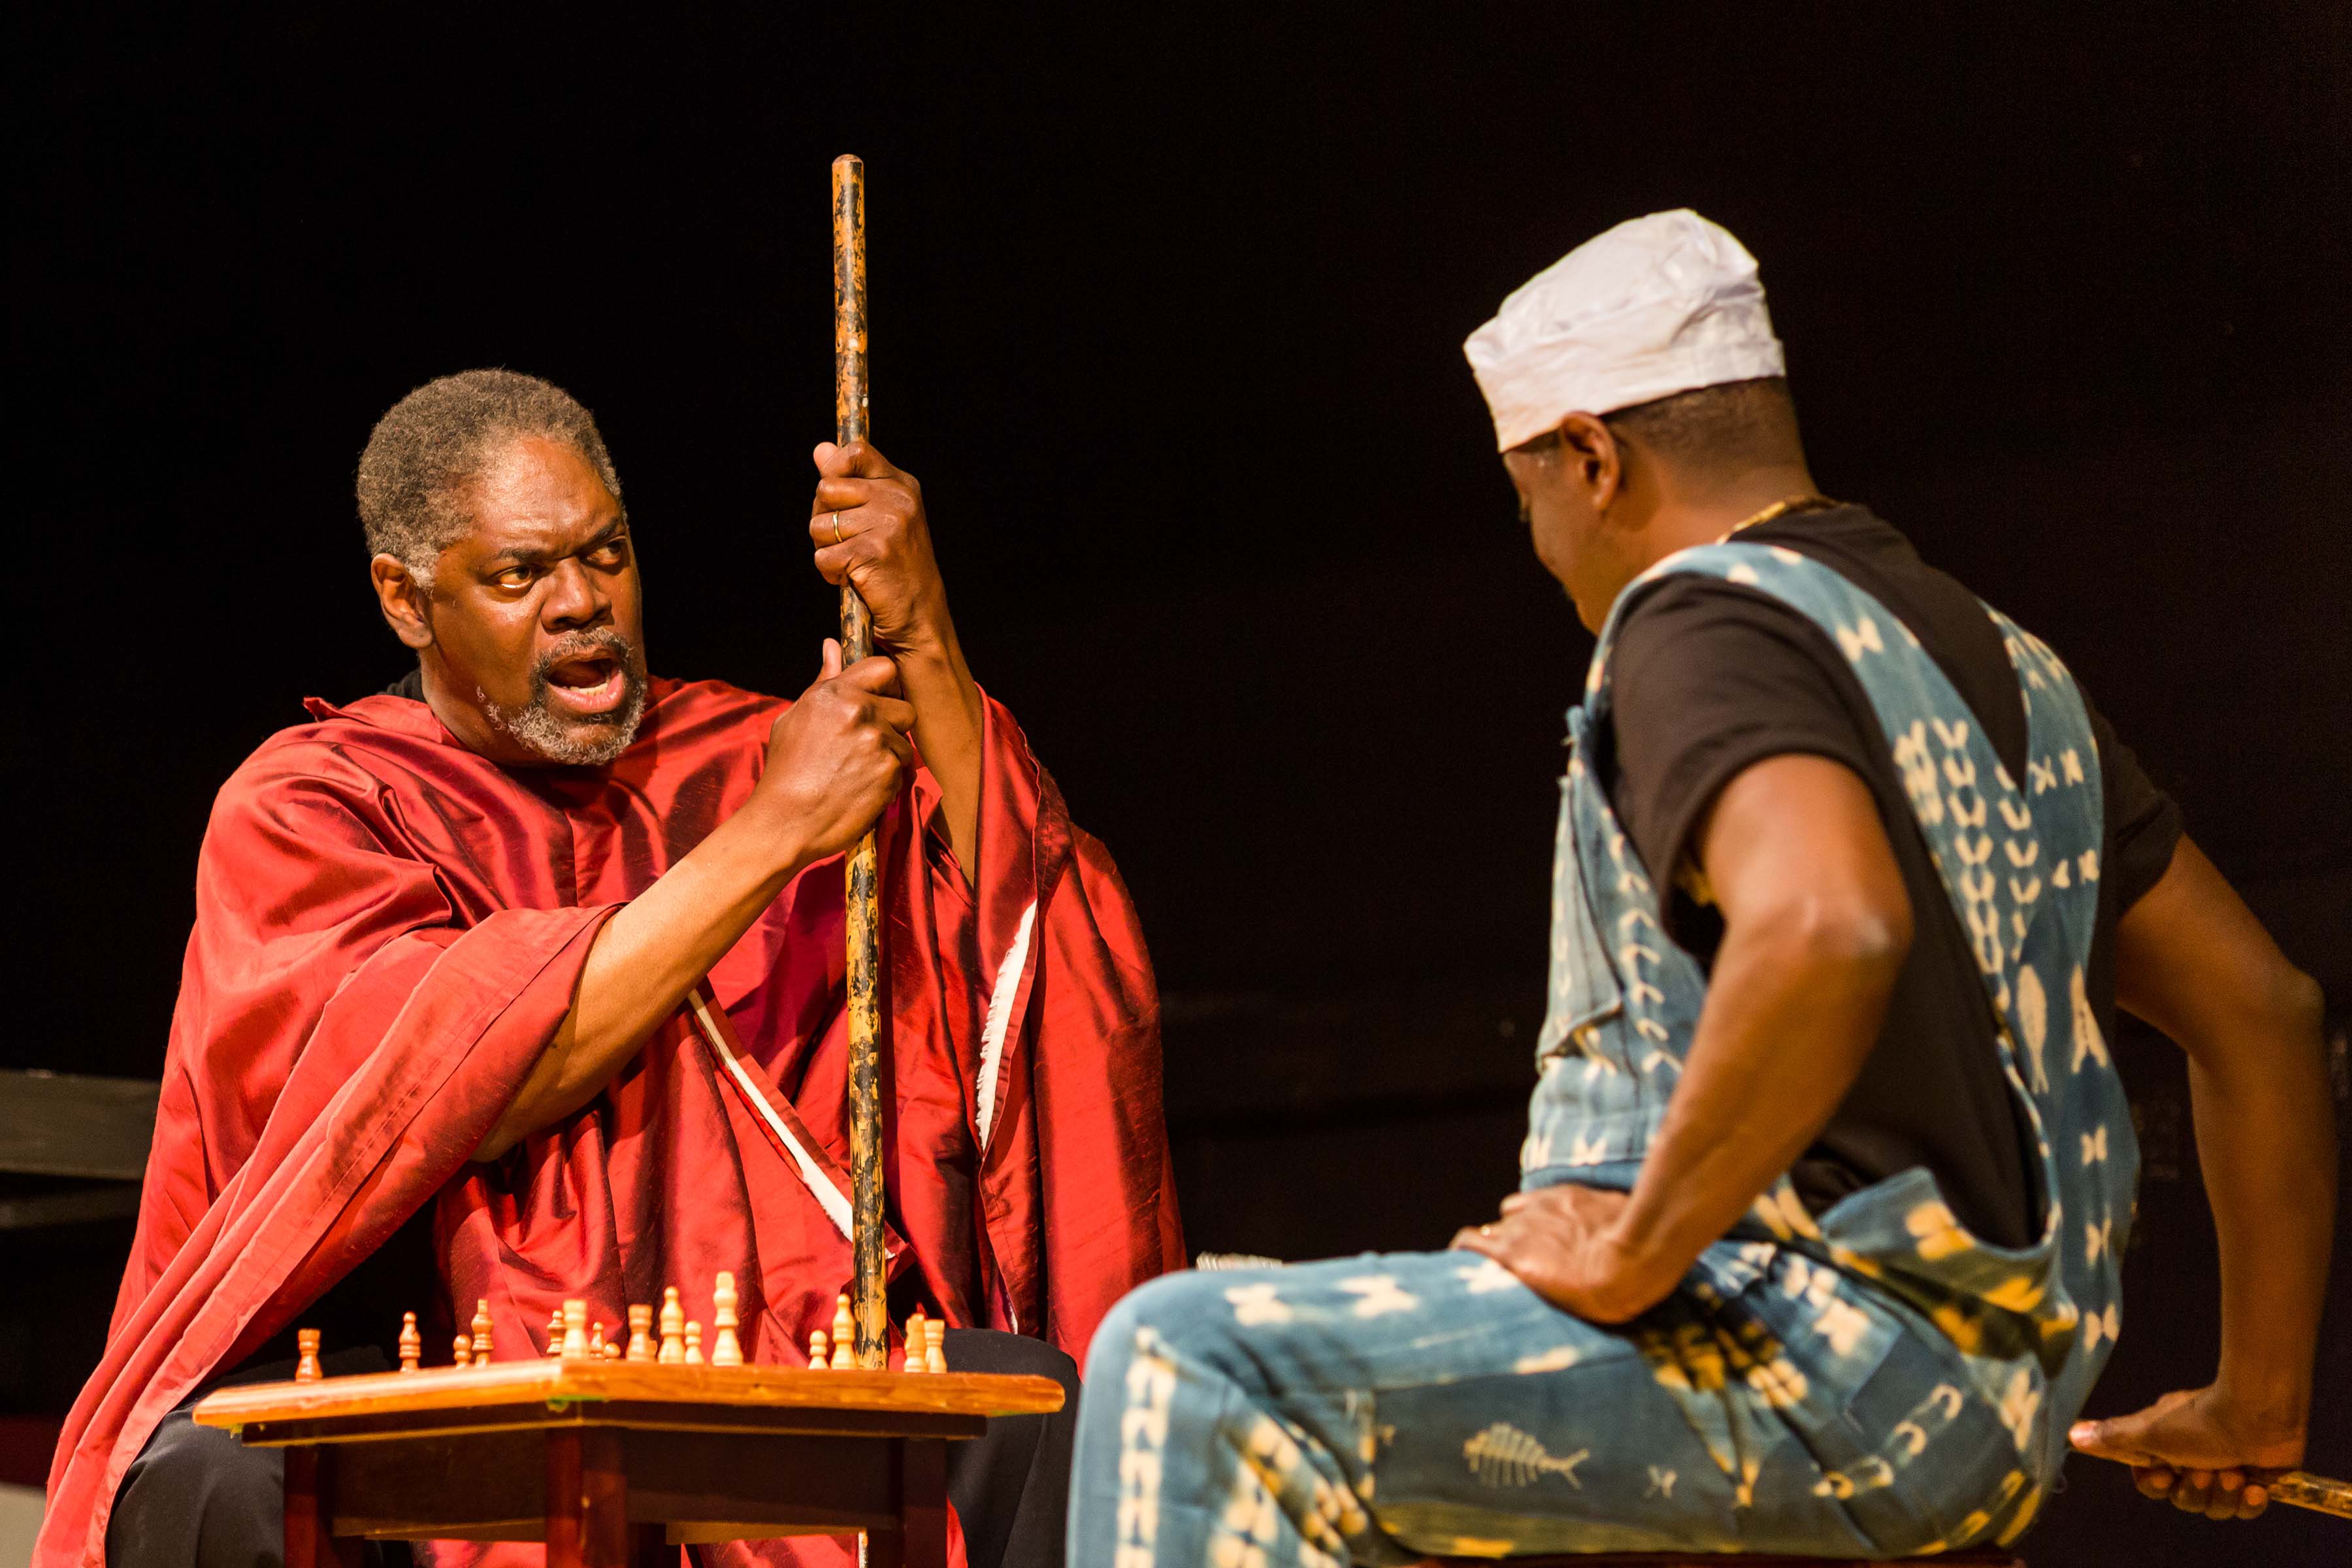 Johnny Lee Davenport (Great Grand Daddy Deus) and Regie Gibson (Great Grand Paw Sidin) in "black odyssey boston". Photo: Maggie Hall.